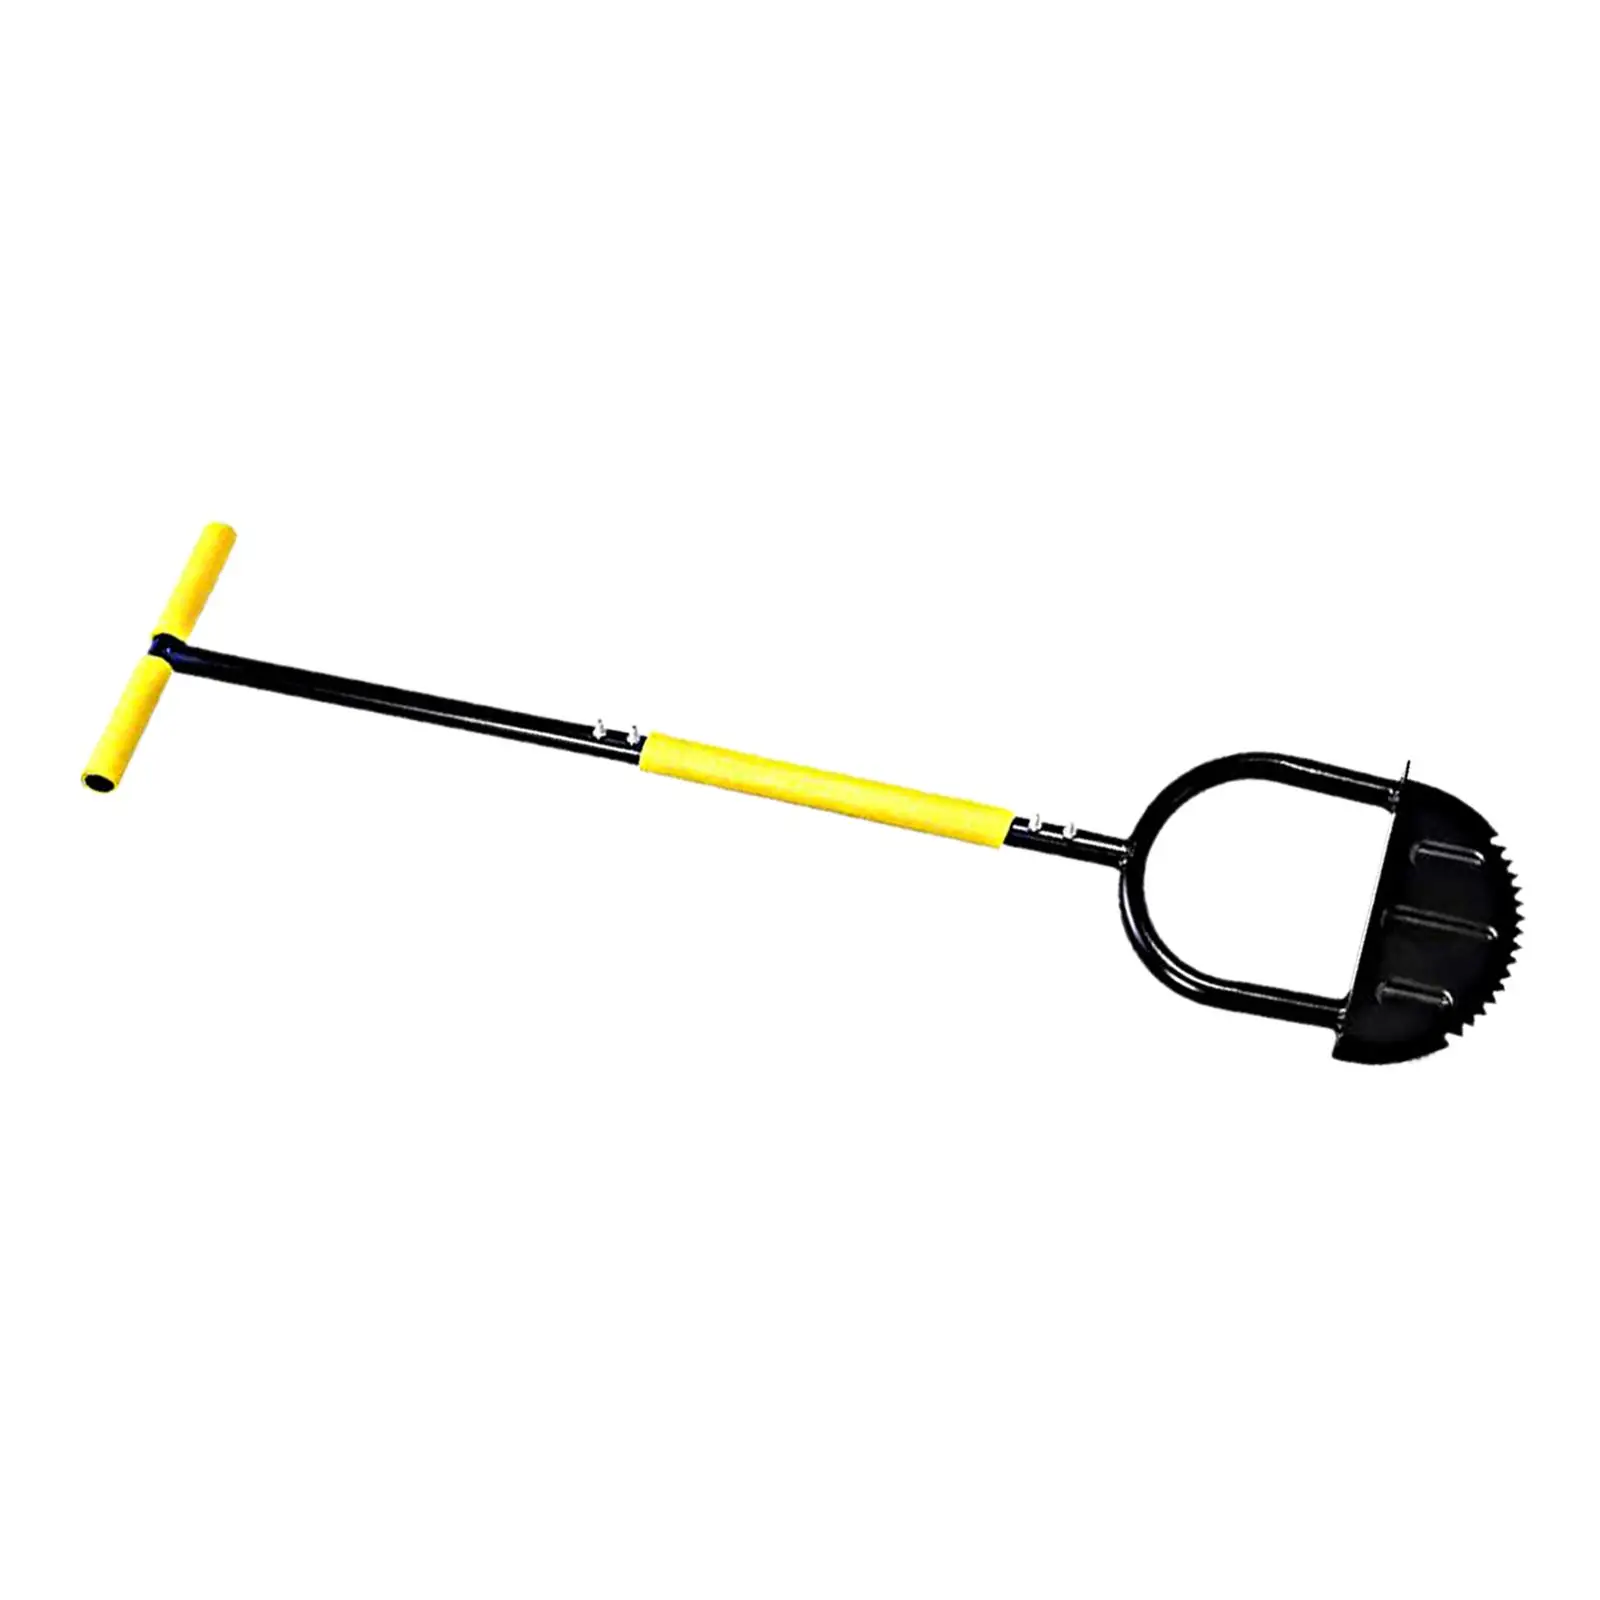 Garden Edging Tool Half Moon Ergonomic Handle Lawn Step Edger Manual Lawn Edger with Serration for Cleaning Edges Landscaping